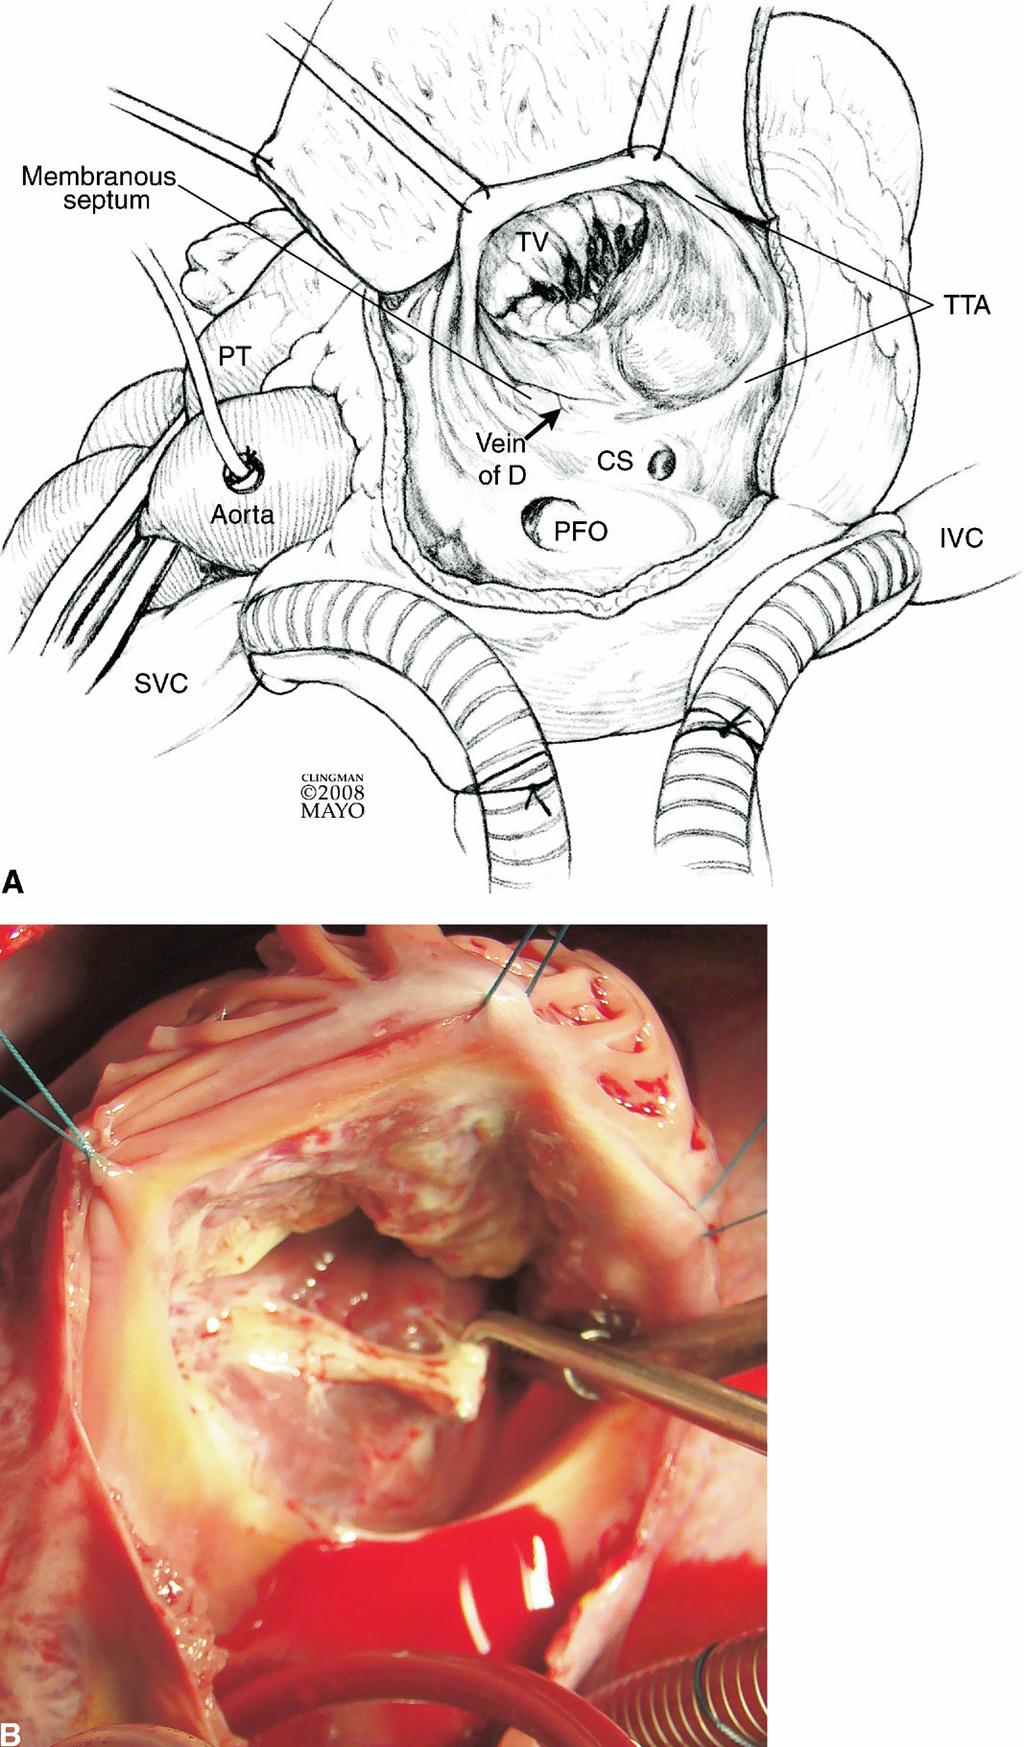 110 J.A. Dearani, E. Bacha, and J.P. da Silva Operative Technique Figure 1 (A) Operation is performed via median sternotomy. Intraoperative transesophageal echocardiogram is used routinely.